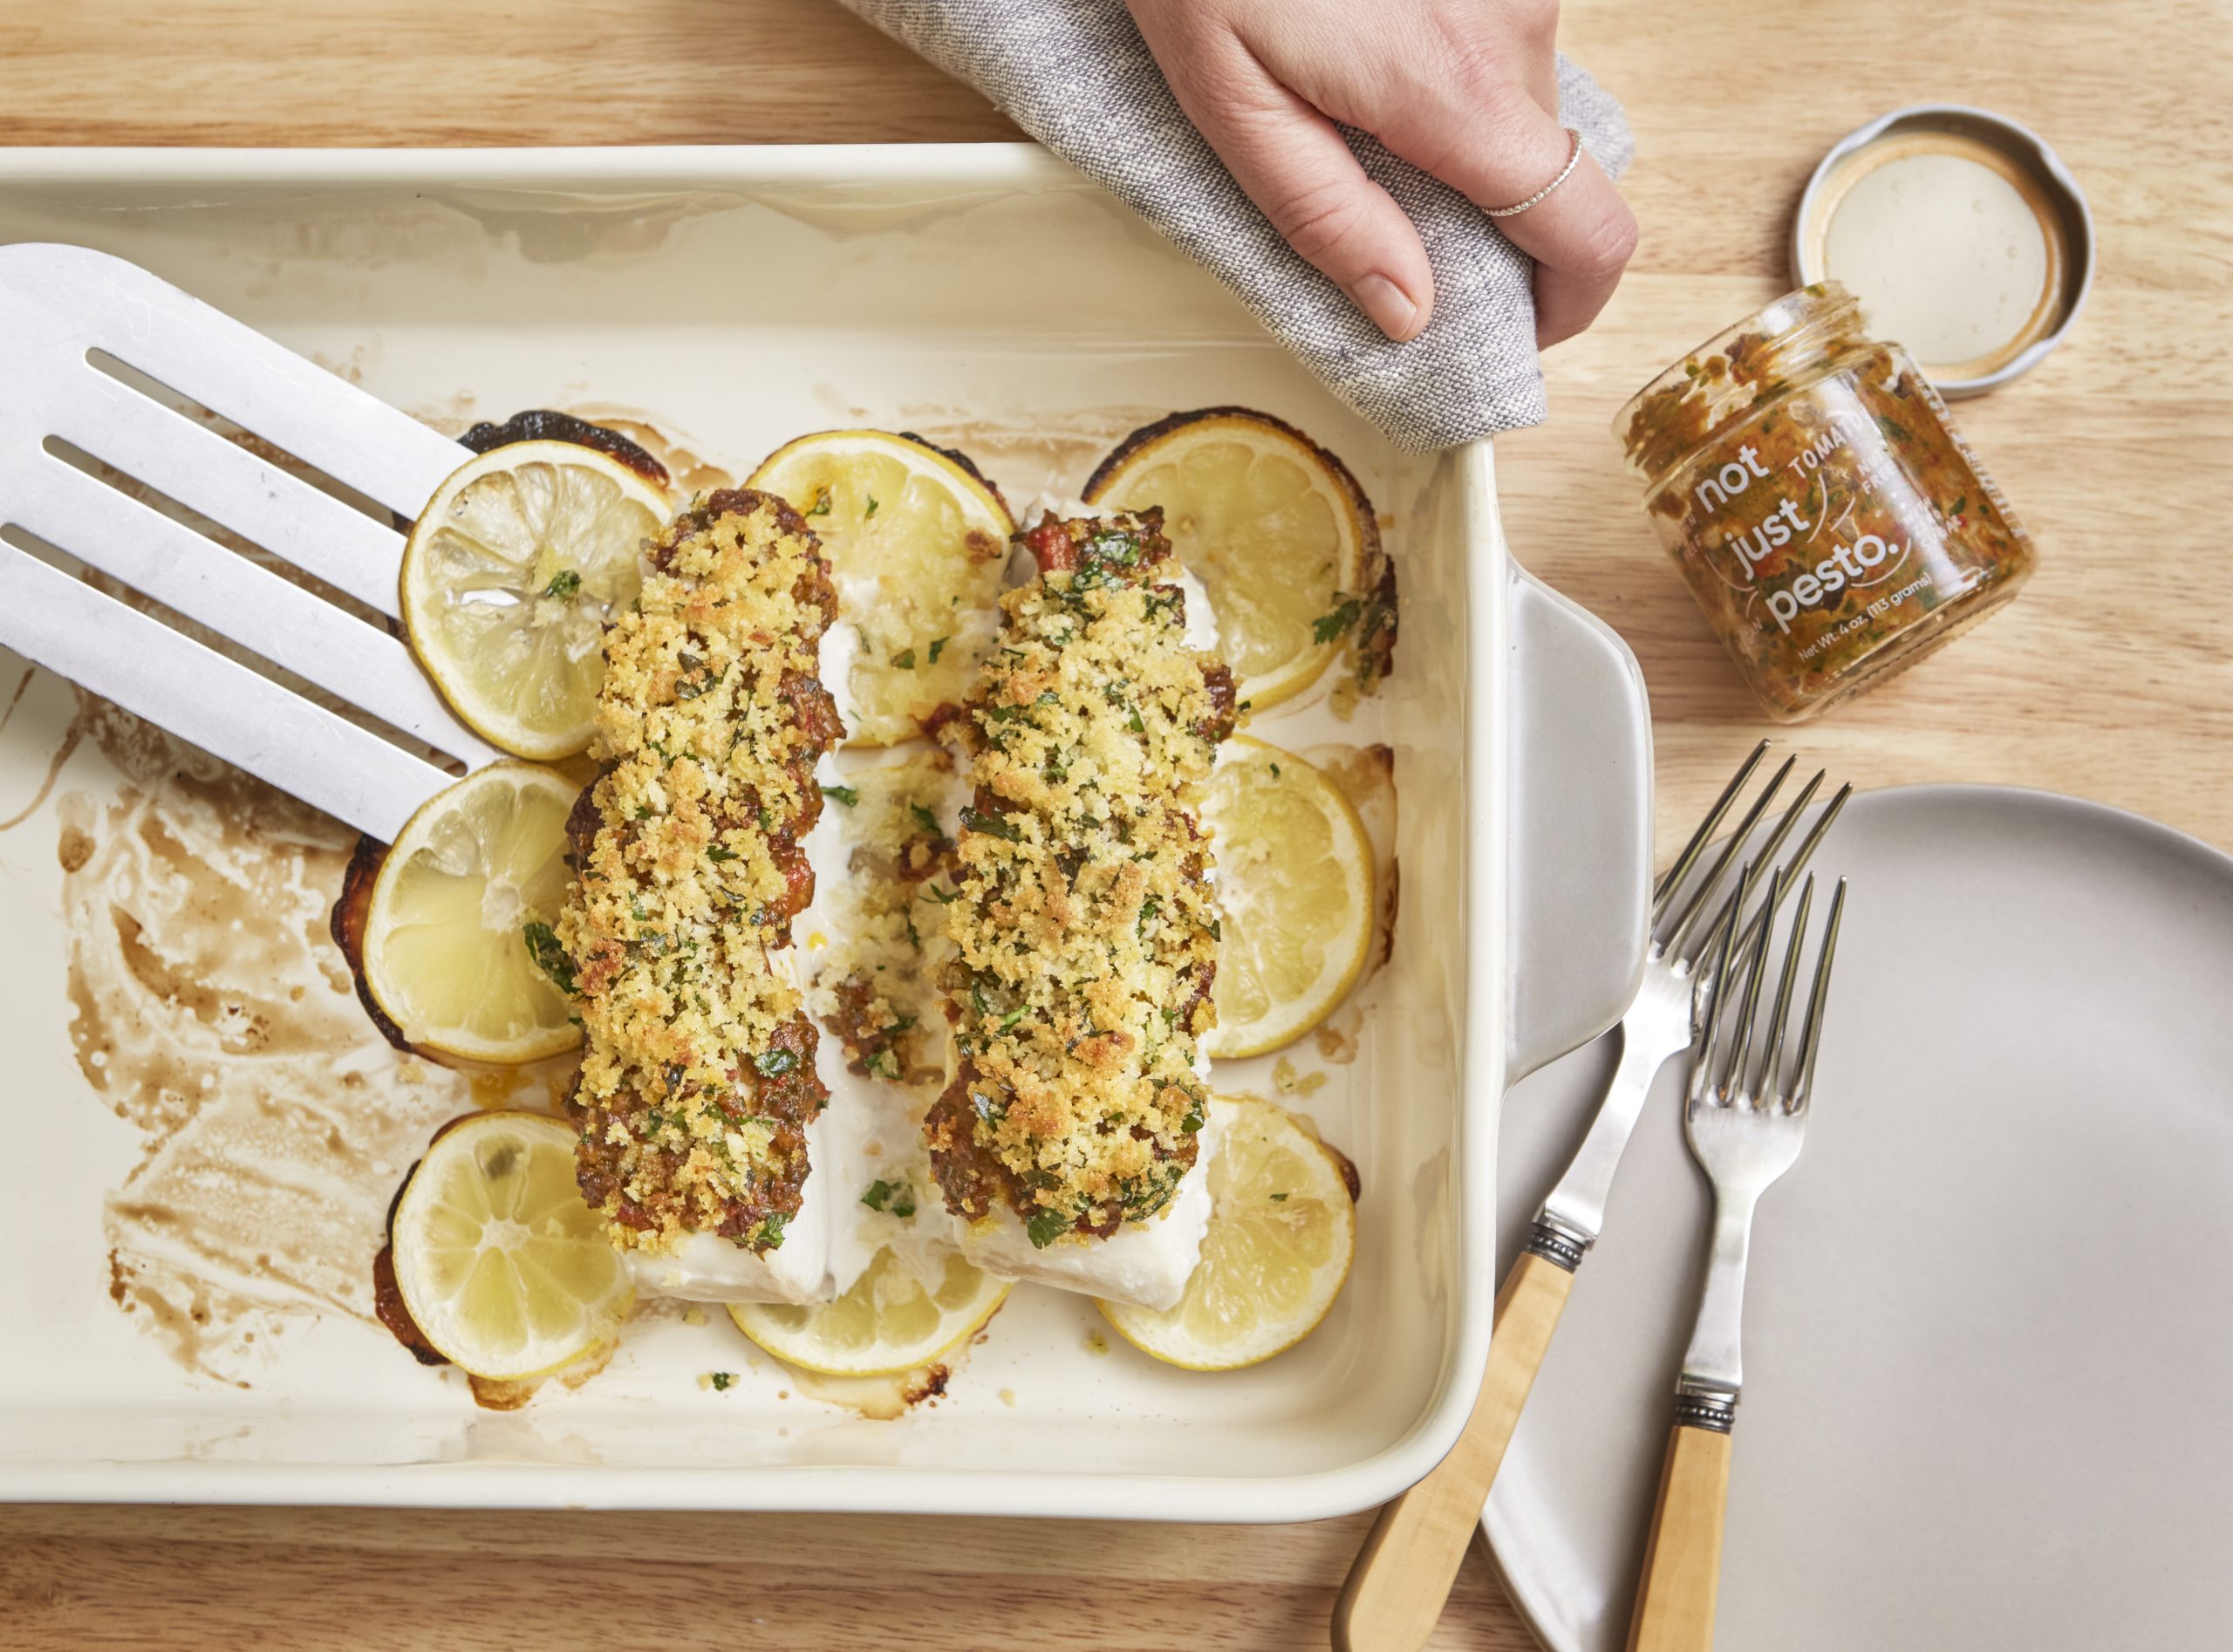 baked fish with lemony breadbrumbs and not just pesto being taken out of pan